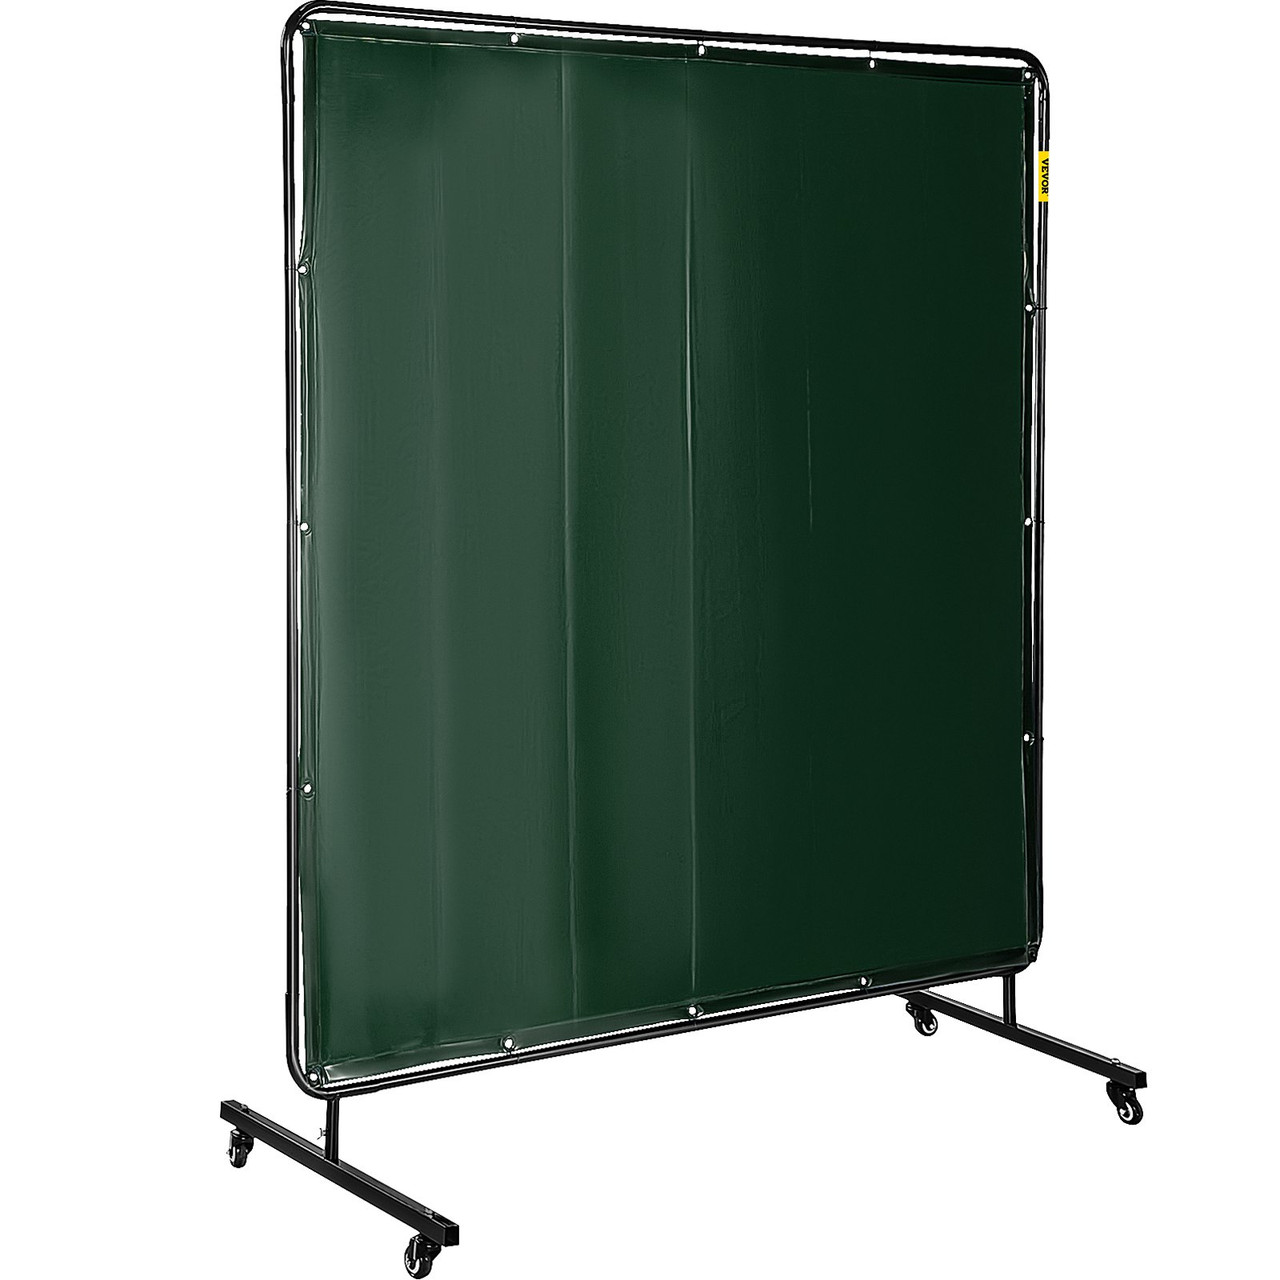 Welding Screen with Frame 6' x 6', Welding Curtain with 4 Wheels, Welding Protection Screen Green Flame-Resistant Vinyl, Portable Light-Proof Professional